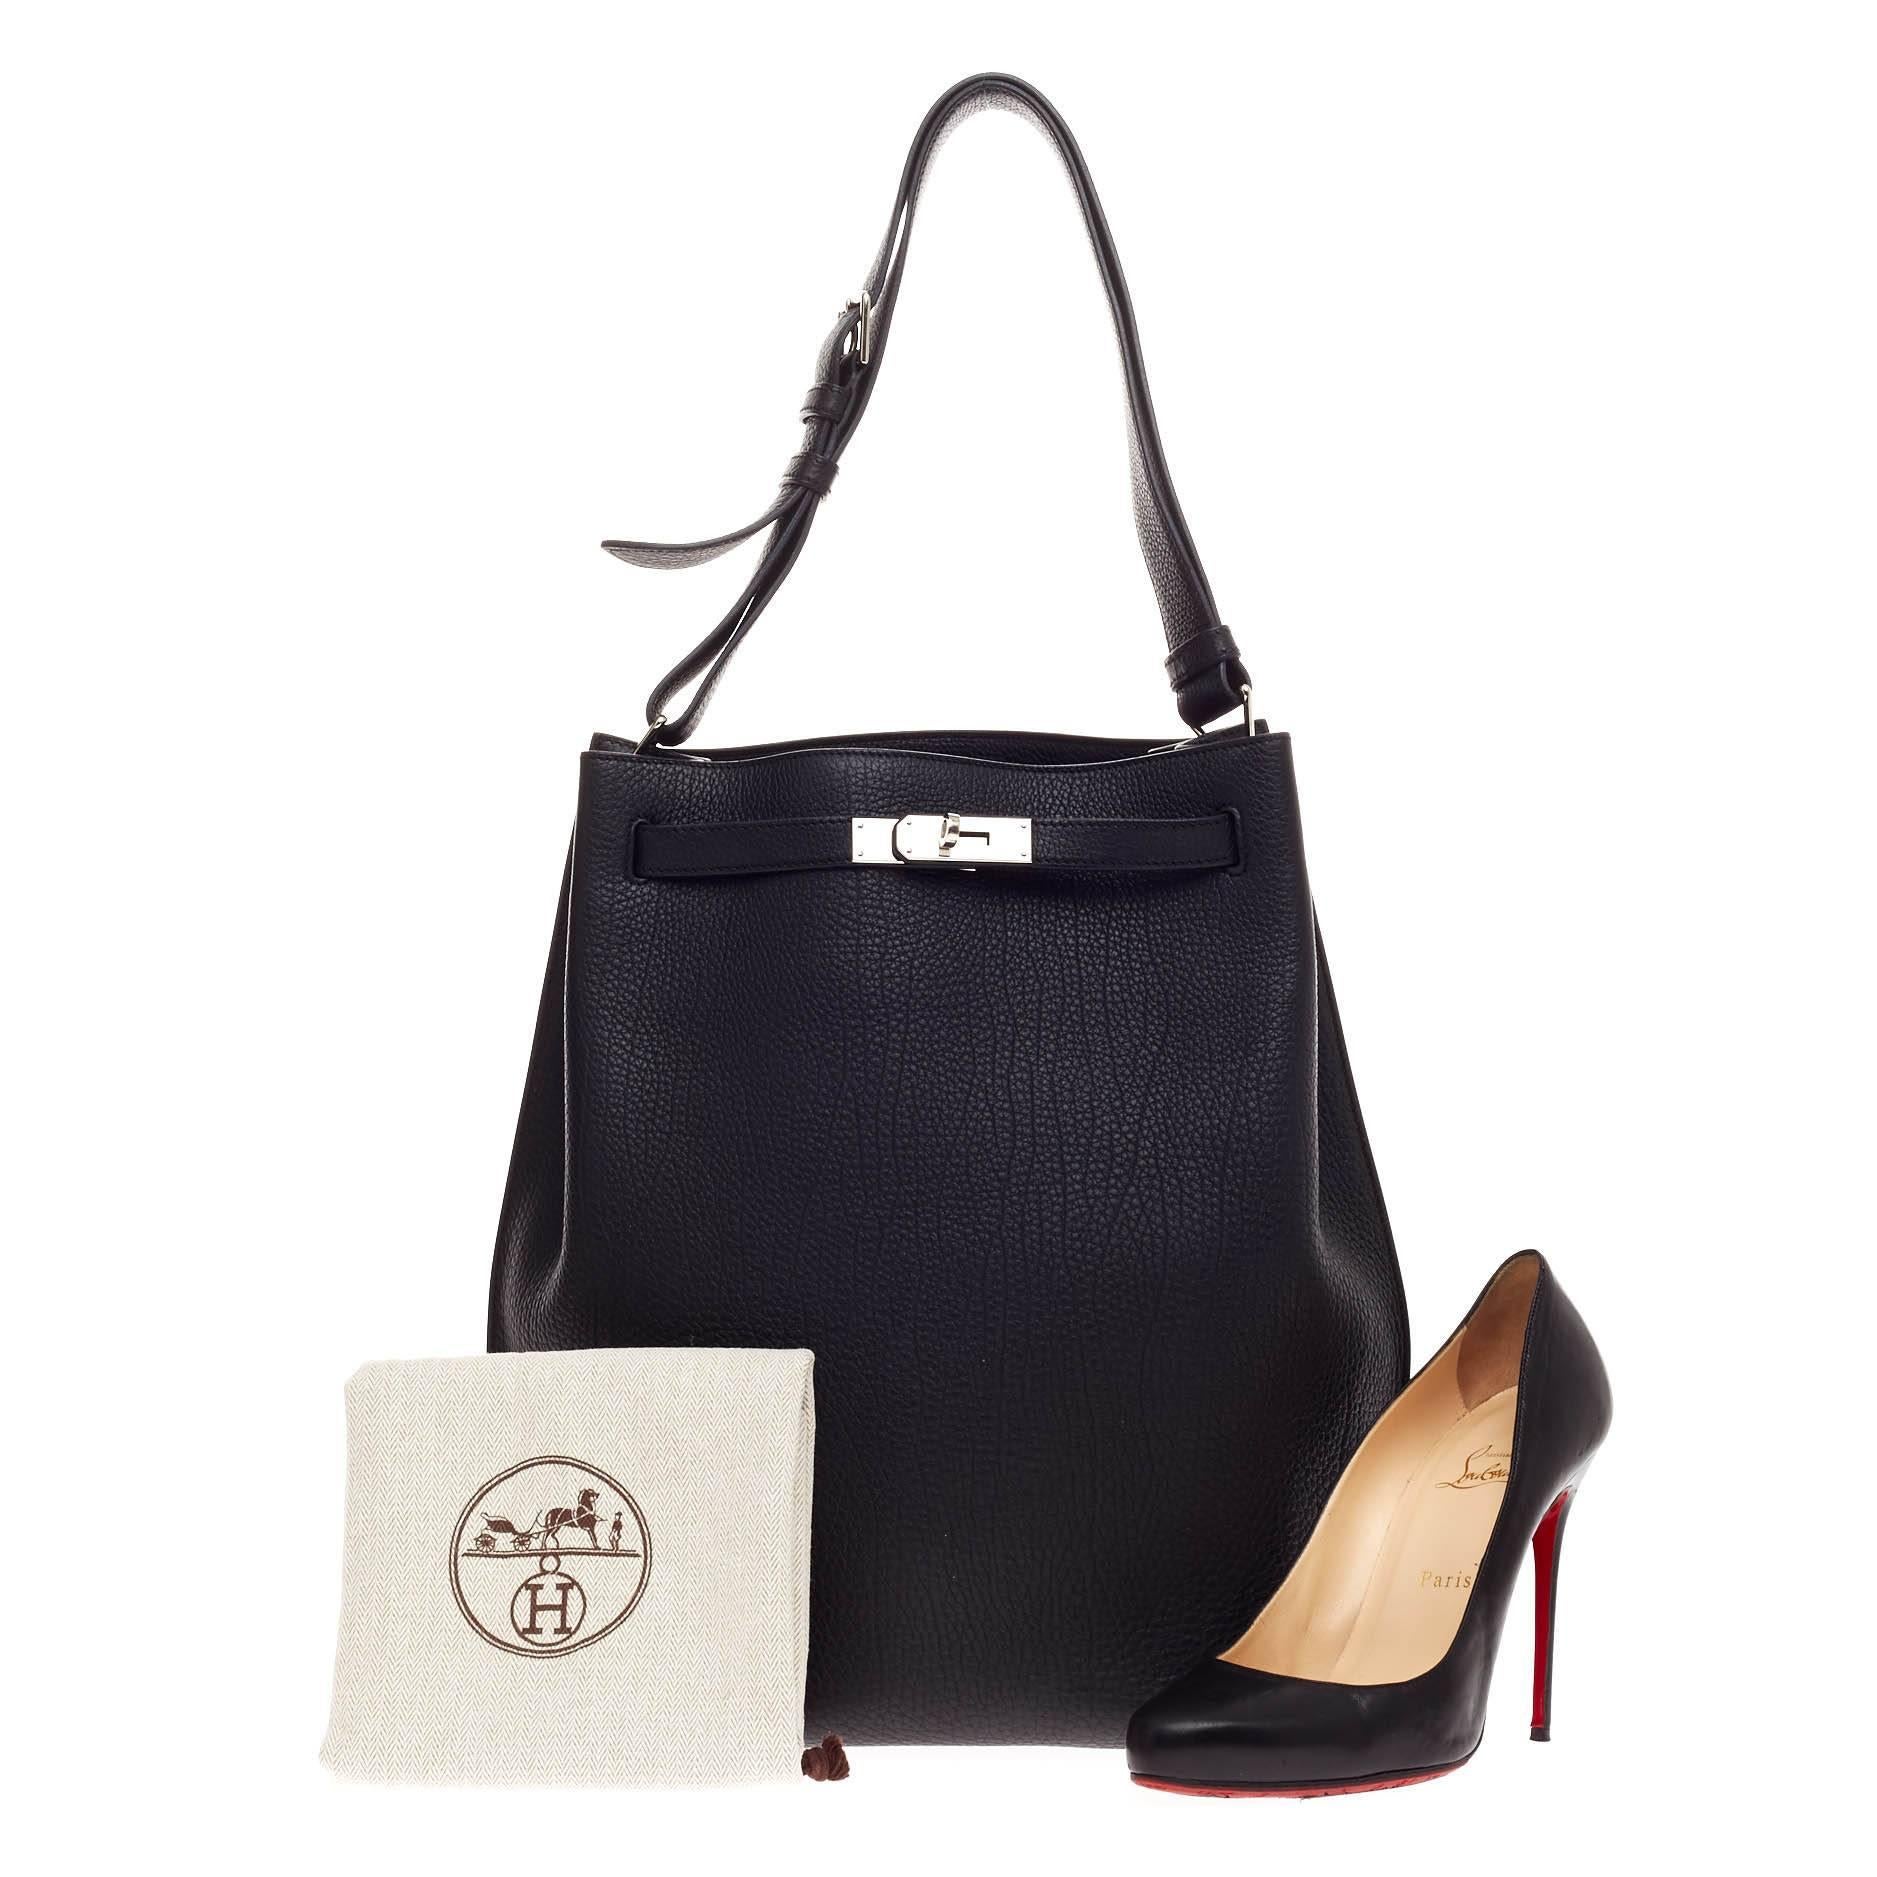 This authentic Hermes So Kelly Togo 26 first released in 2008 is an updated and modern reinterpretation of the Kelly Sport taking its distinct look to Hermes' classic kelly design. Crafted in black togo leather, this luxurious hobo-inspired bag